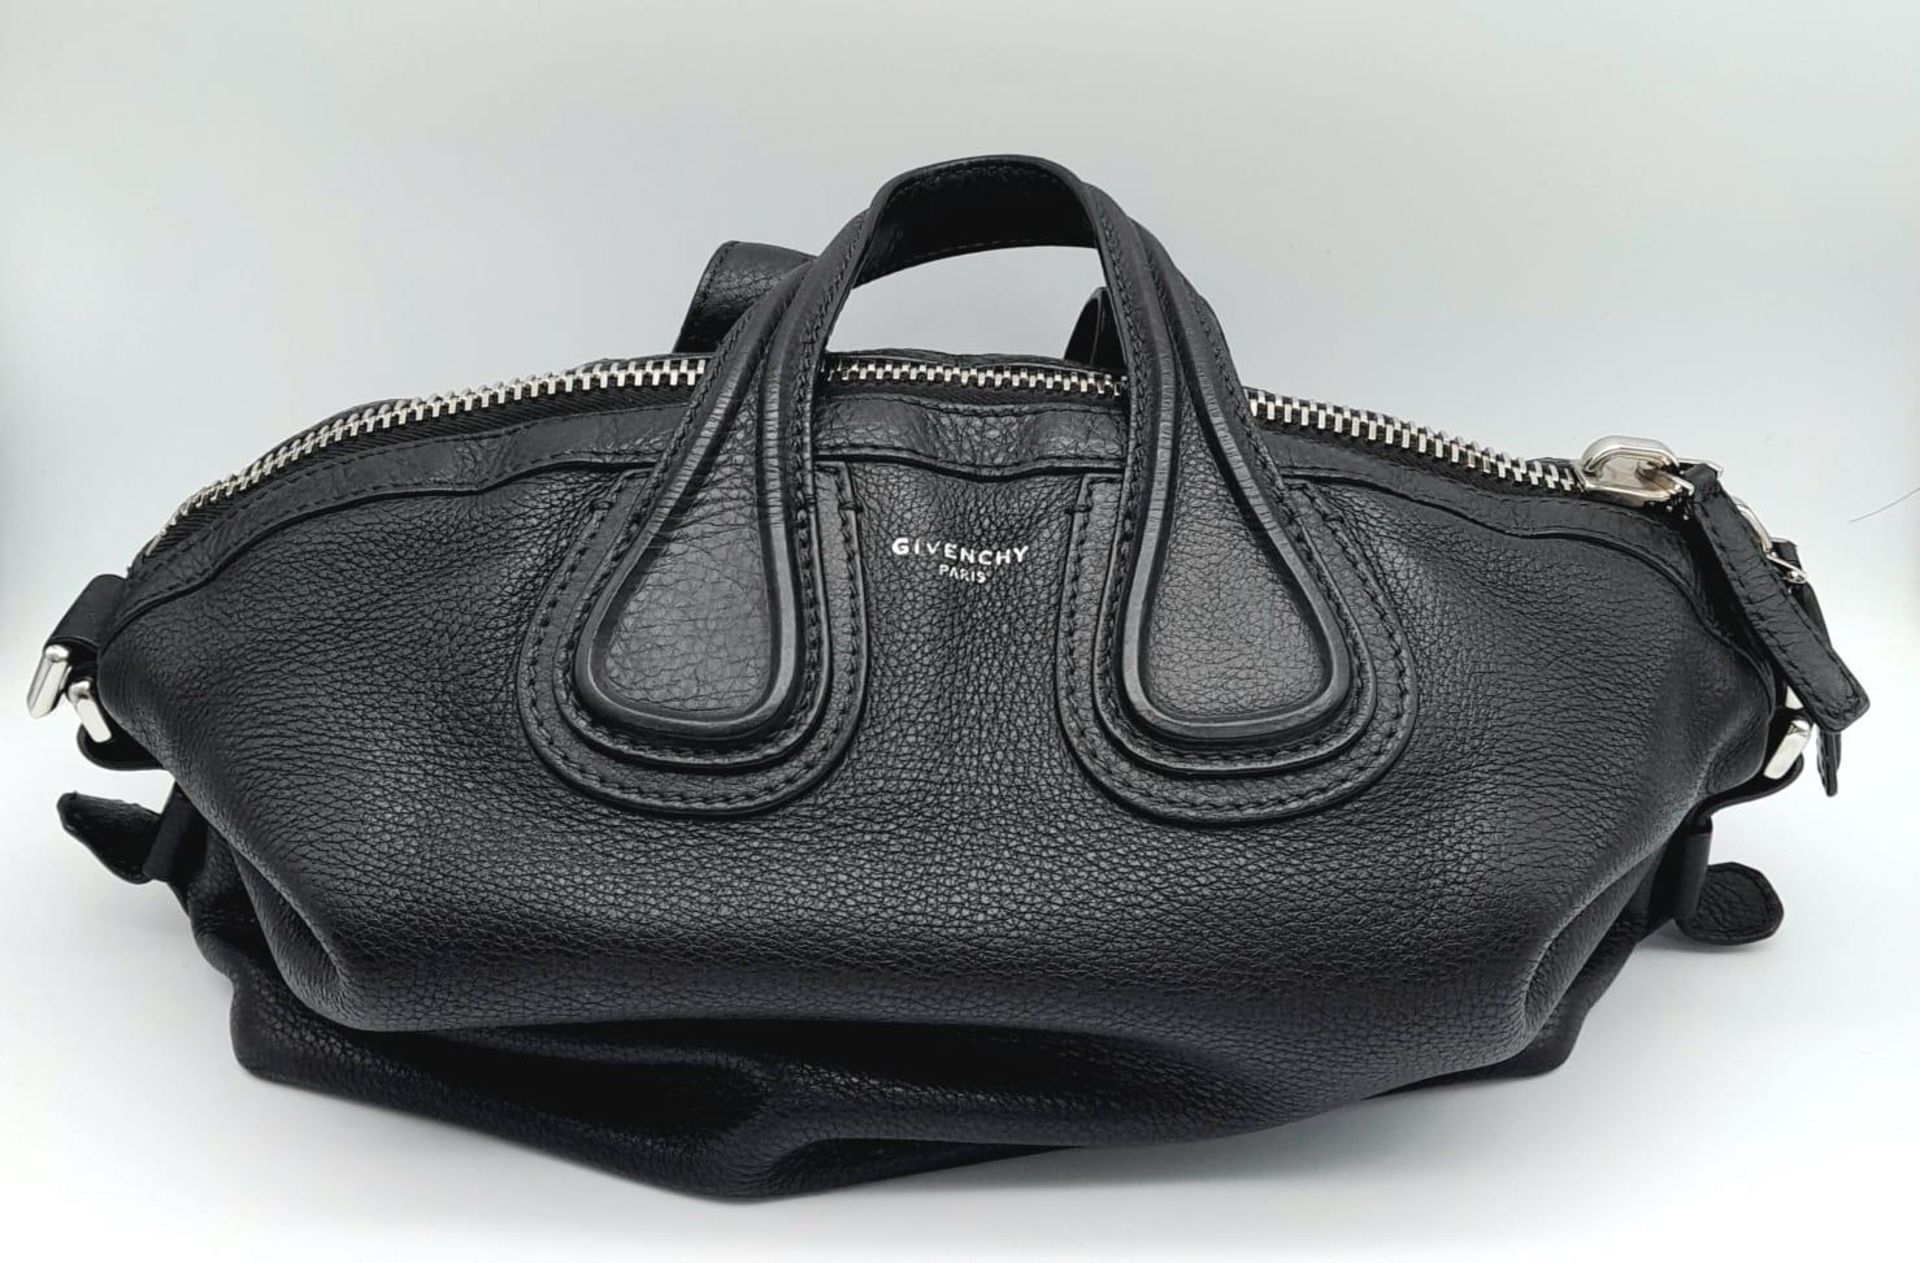 A Givenchy Black Grained Leather Nightingale Shoulder Bag. Come with a detachable shoulder strap.